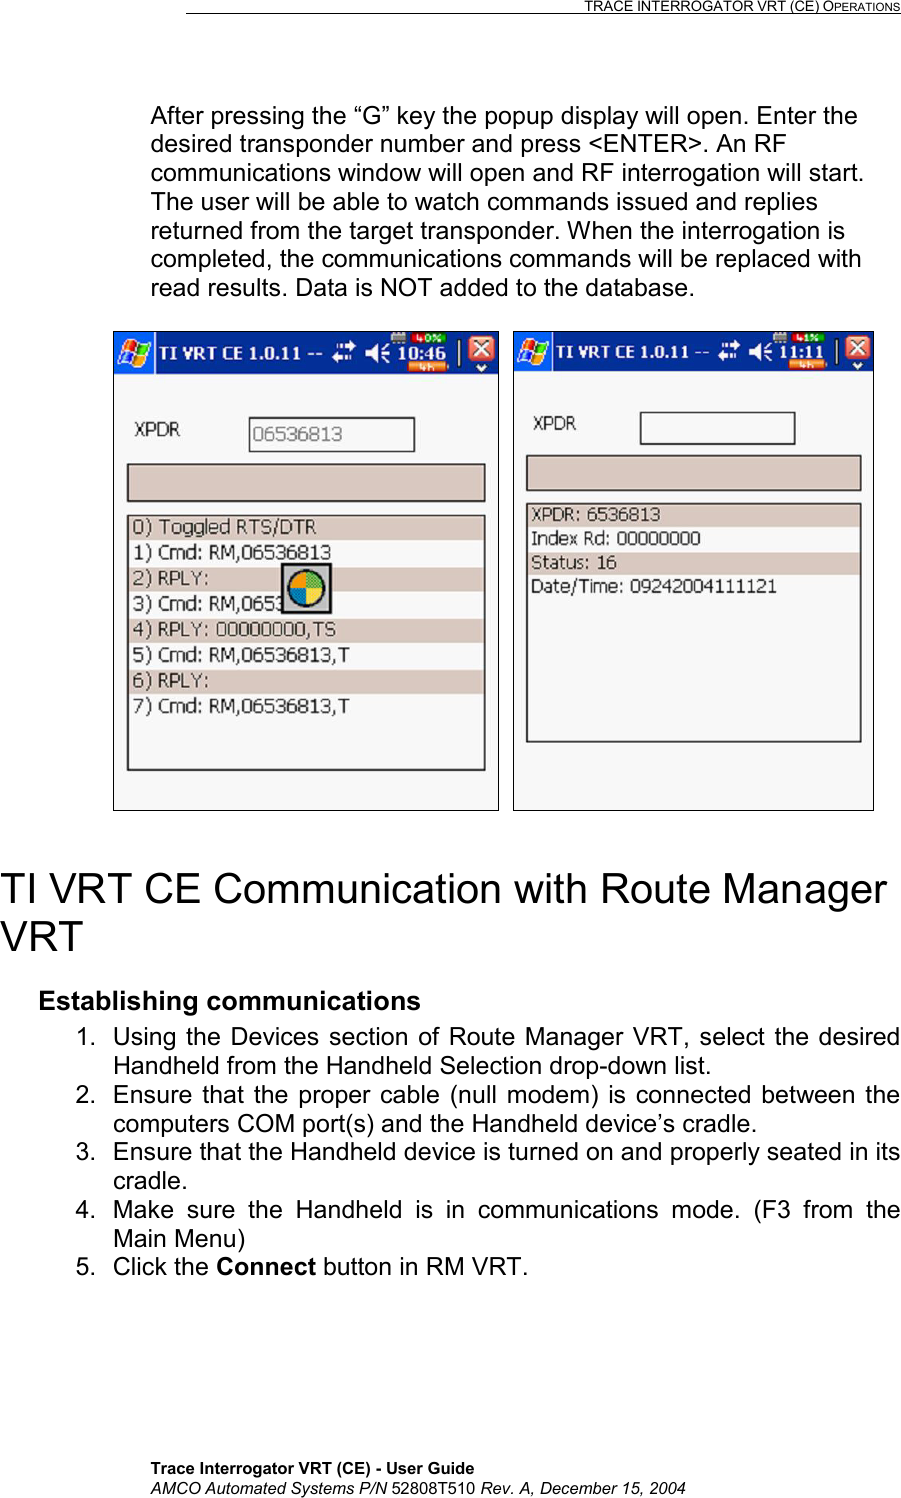                                                                                                                              TRACE INTERROGATOR VRT (CE) OPERATIONS    Trace Interrogator VRT (CE) - User Guide AMCO Automated Systems P/N 52808T510 Rev. A, December 15, 2004 After pressing the “G” key the popup display will open. Enter the desired transponder number and press &lt;ENTER&gt;. An RF communications window will open and RF interrogation will start. The user will be able to watch commands issued and replies returned from the target transponder. When the interrogation is completed, the communications commands will be replaced with read results. Data is NOT added to the database.       TI VRT CE Communication with Route Manager VRT Establishing communications 1.  Using the Devices section of Route Manager VRT, select the desired Handheld from the Handheld Selection drop-down list. 2.  Ensure that the proper cable (null modem) is connected between the computers COM port(s) and the Handheld device’s cradle. 3.  Ensure that the Handheld device is turned on and properly seated in its cradle. 4.  Make sure the Handheld is in communications mode. (F3 from the Main Menu) 5. Click the Connect button in RM VRT. 